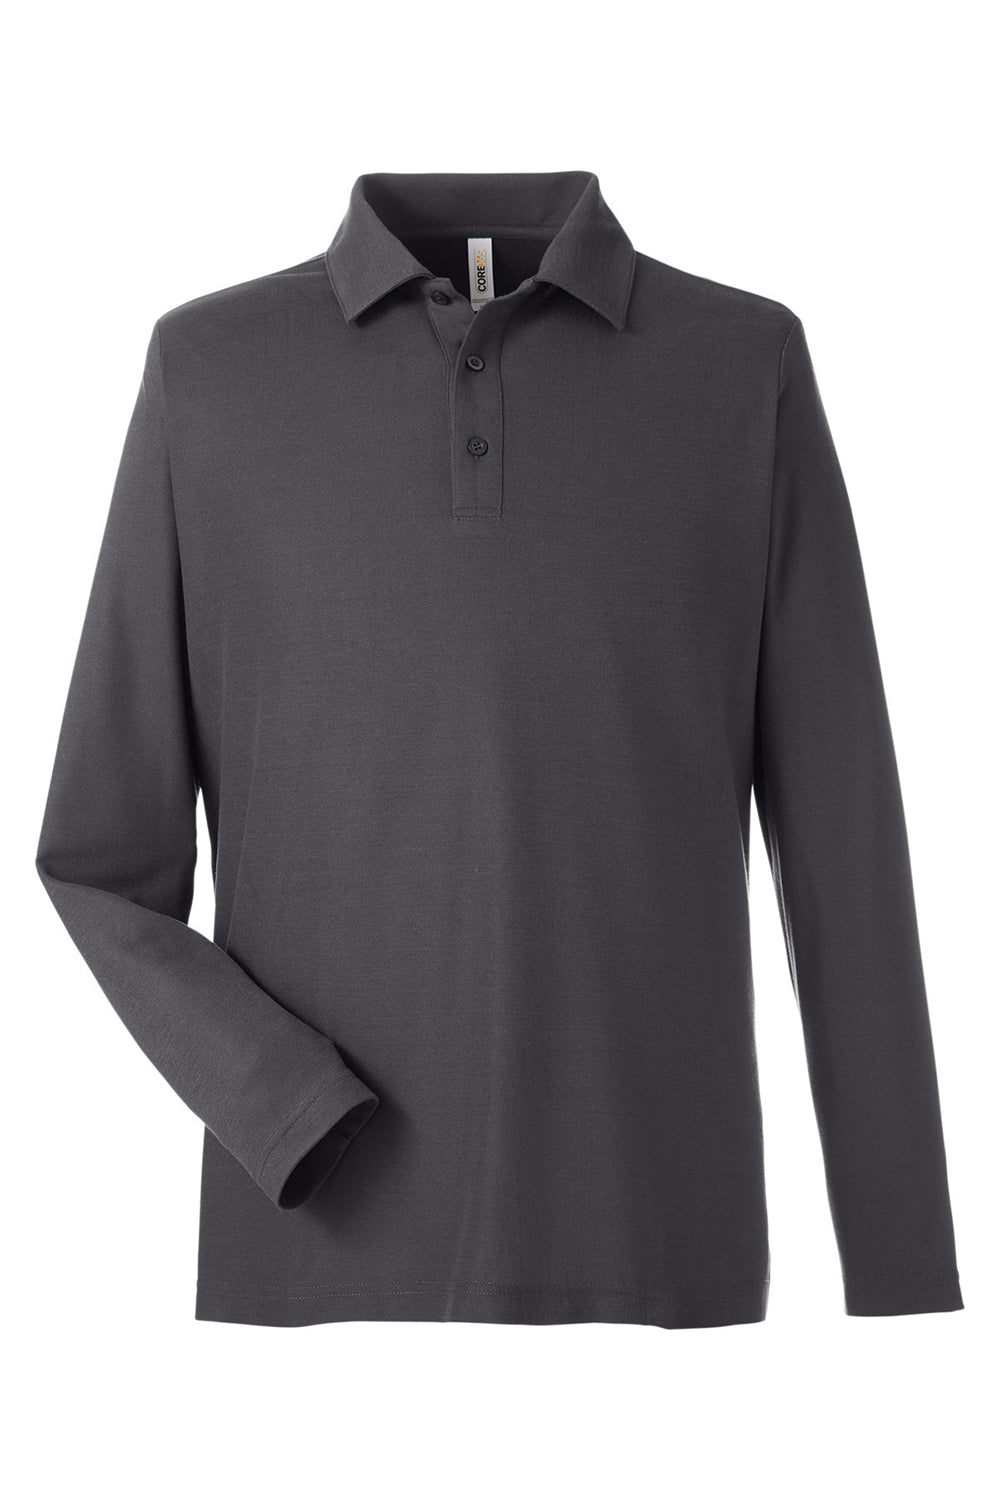 Core 365 CE112L Mens Fusion ChromaSoft Performance Moisture Wicking Long Sleeve Polo Shirt Carbon Grey Flat Front